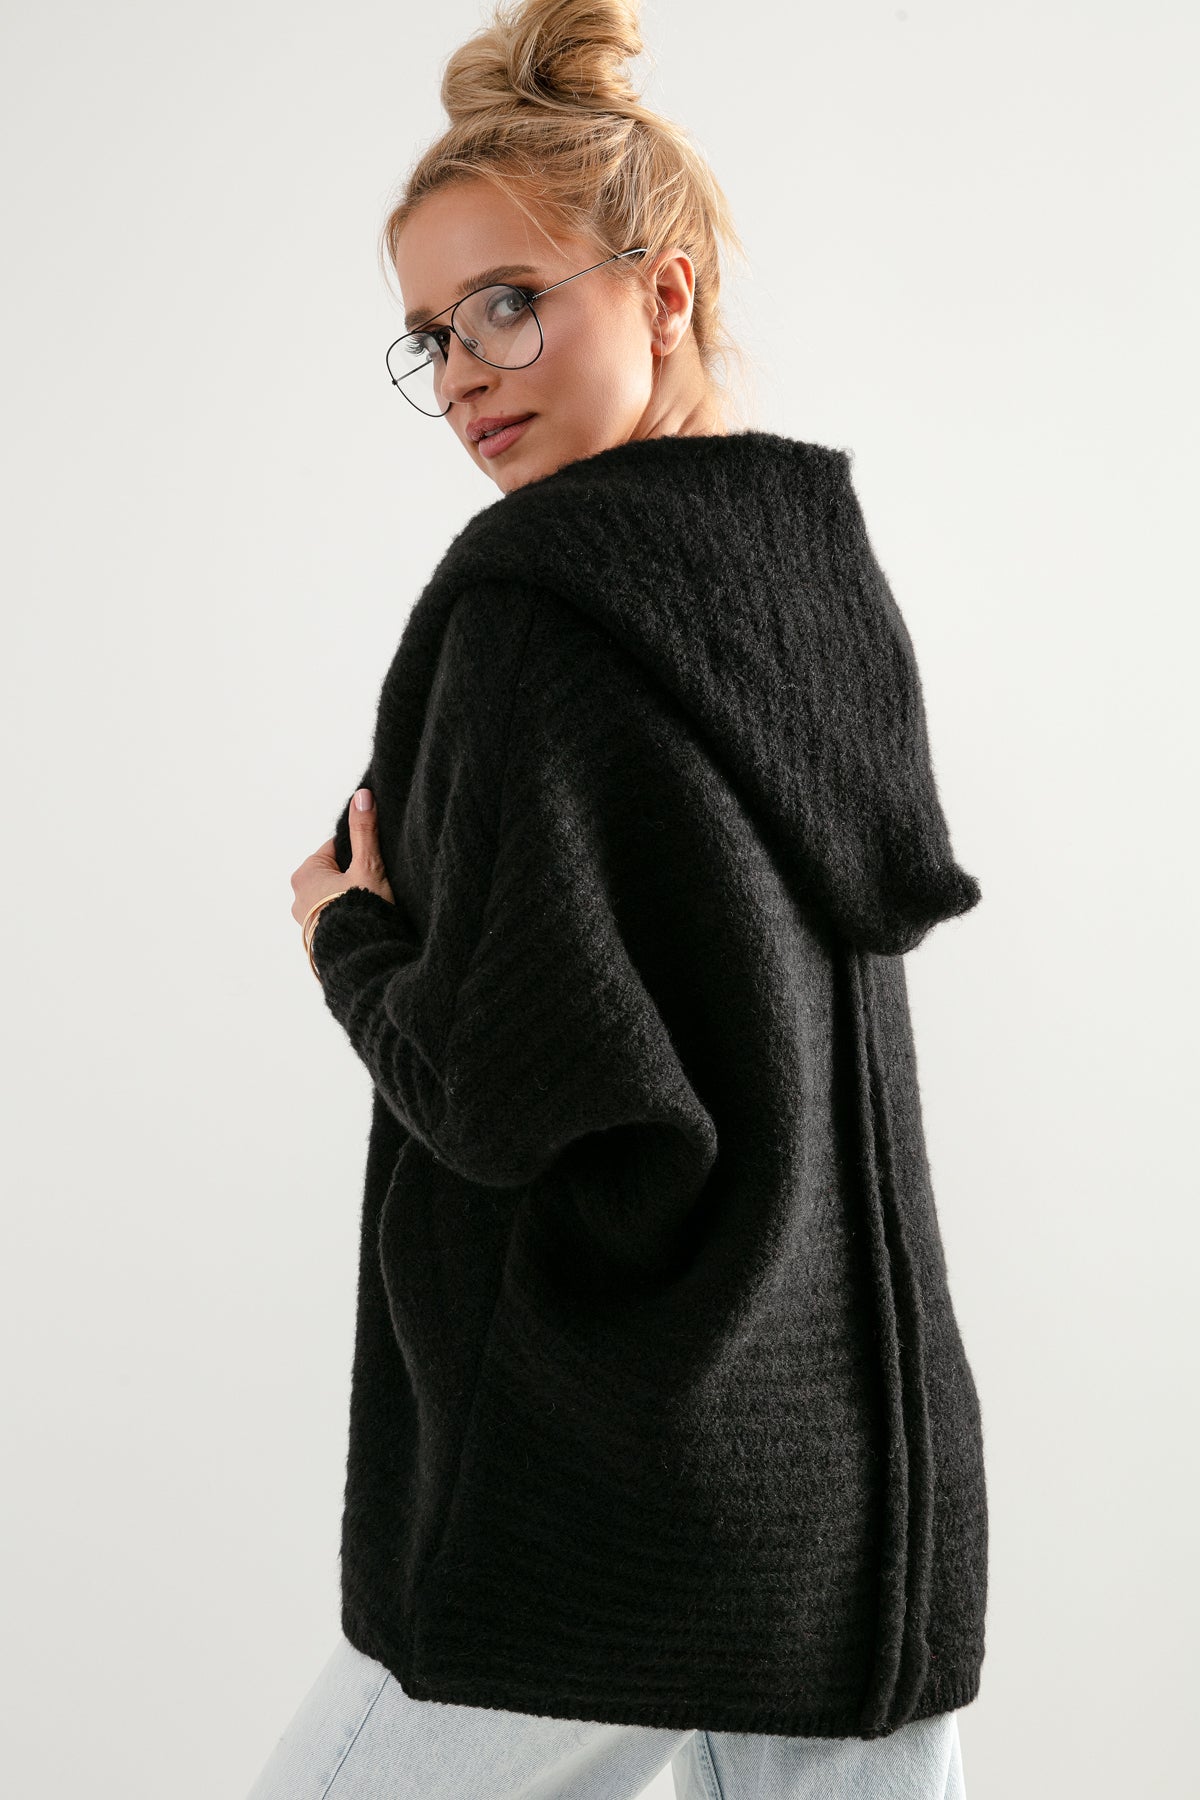 Openfront Hooded Cardigan